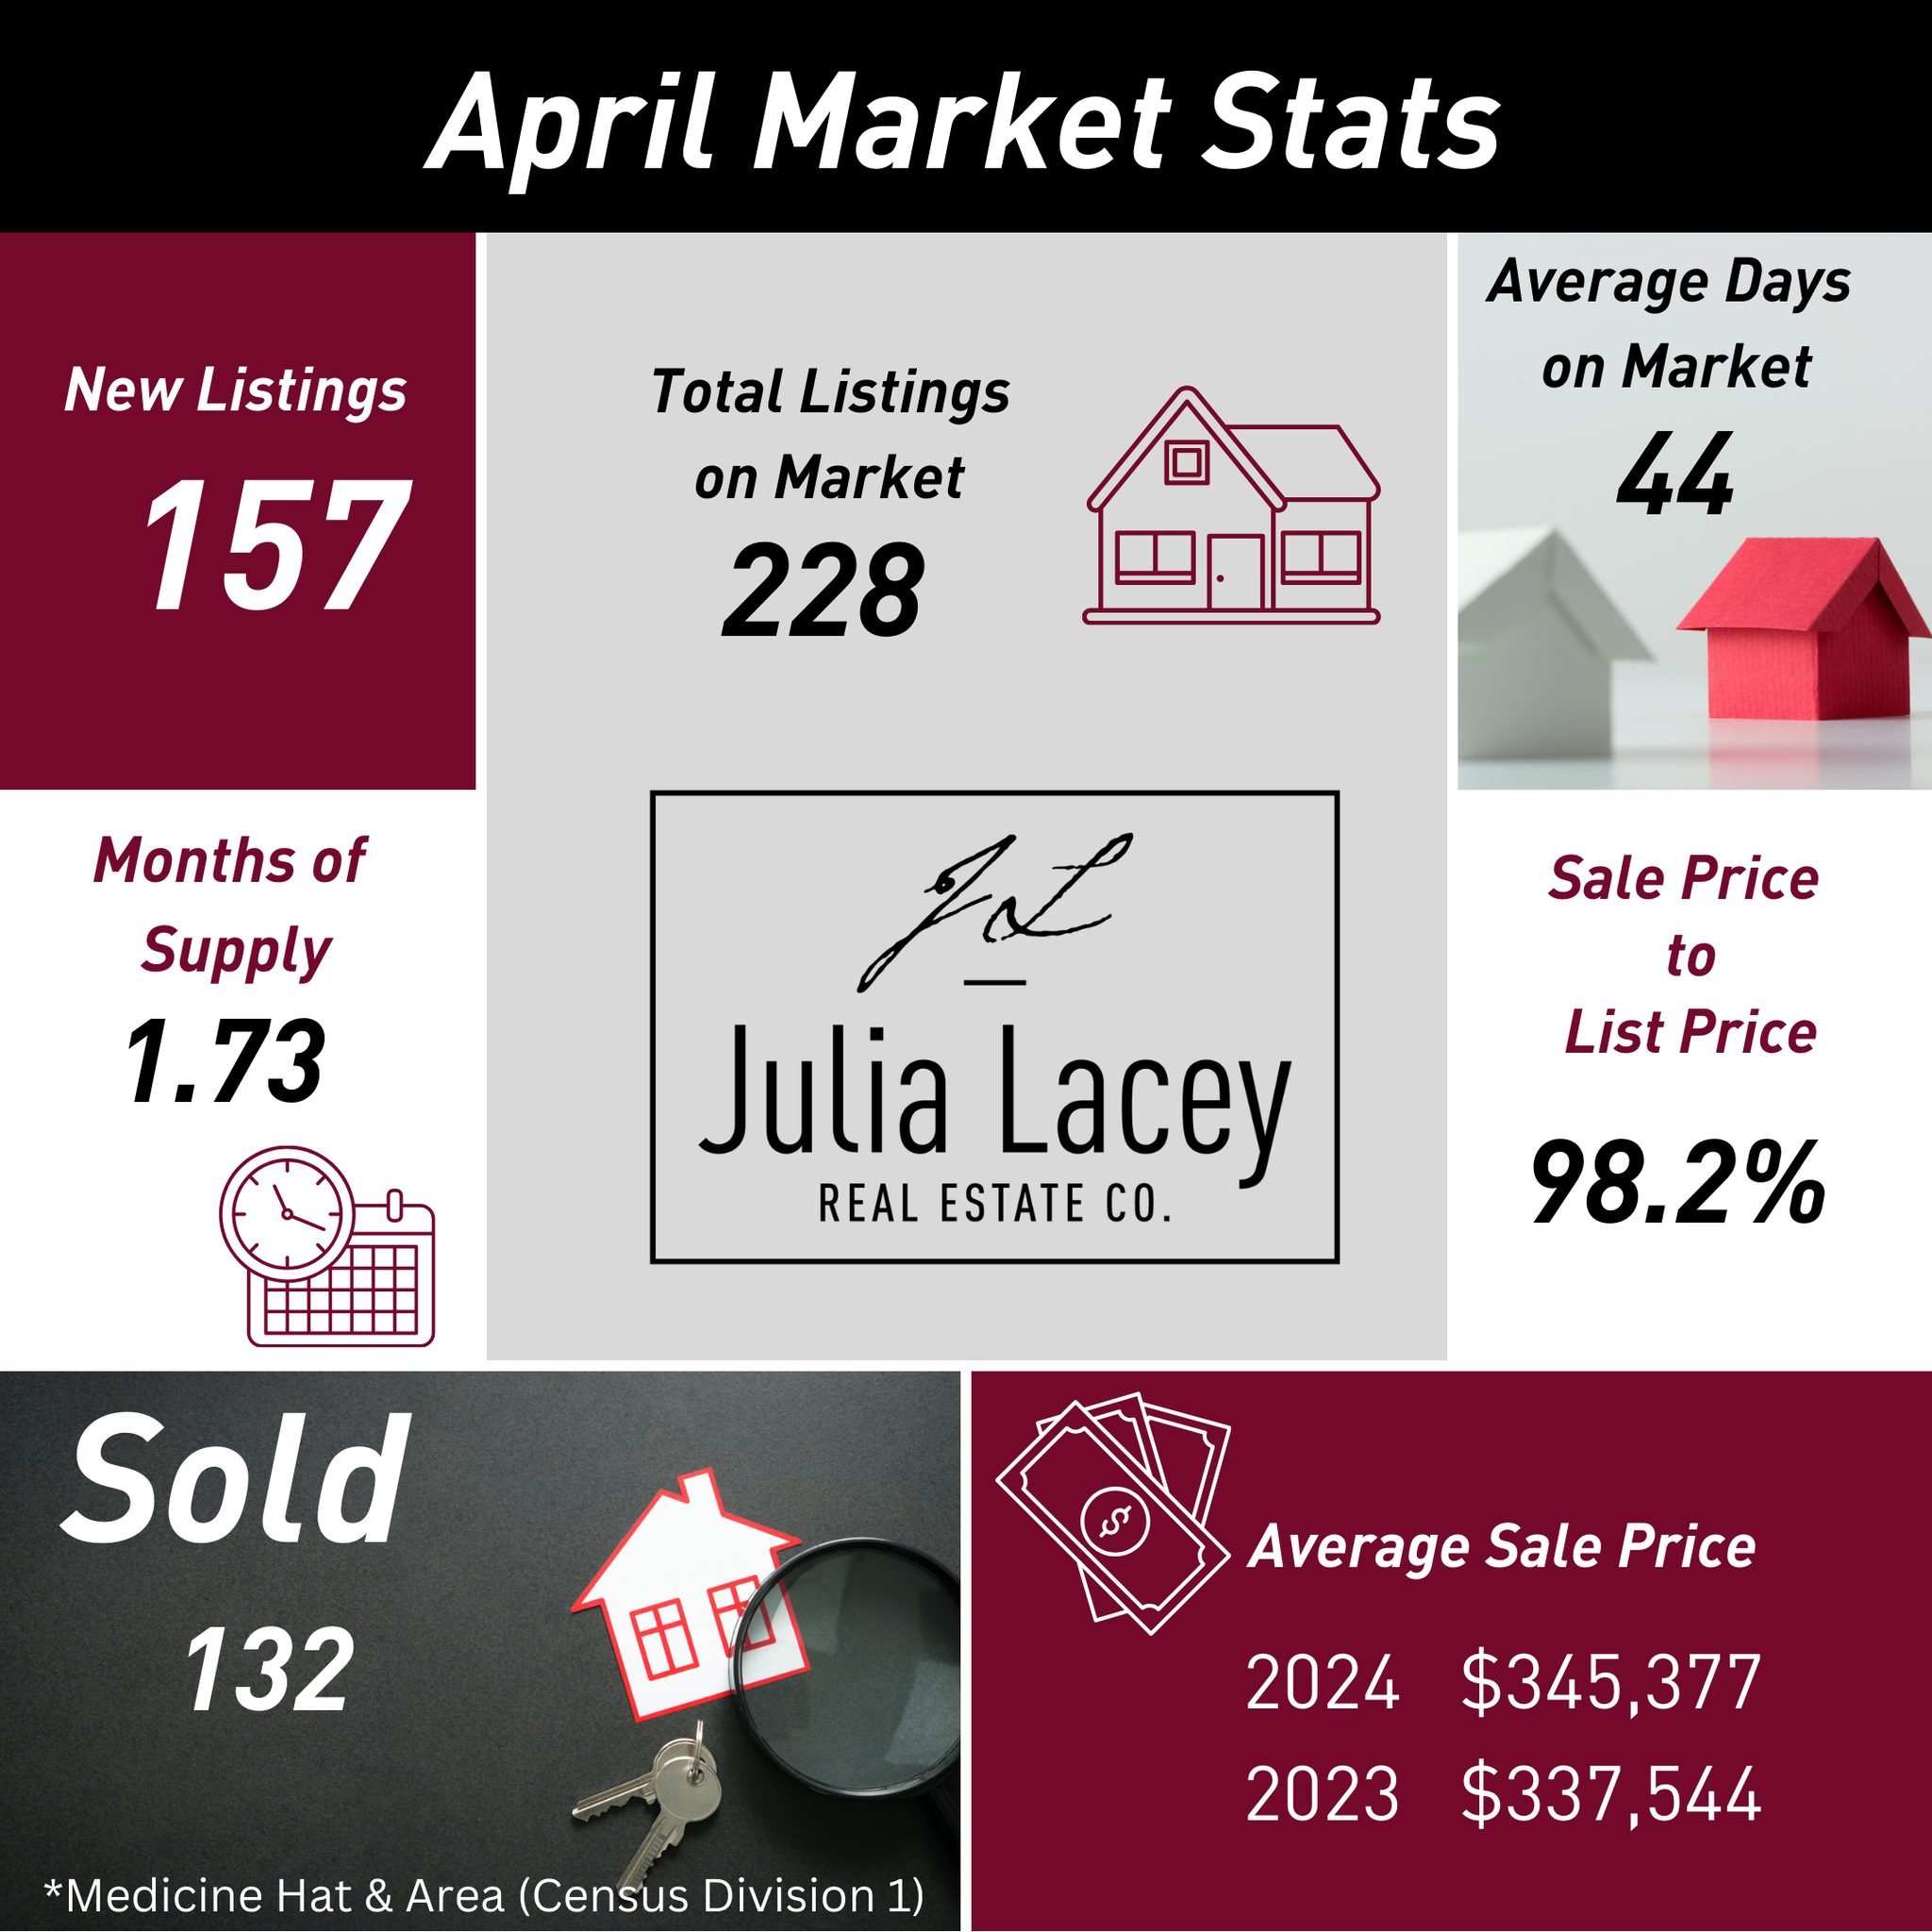 🏡 April Real Estate Market Update: 📈

April saw a resurgence in sales, countering previous declines and bringing year-to-date figures in line with last year's numbers. The uptick in sales was propelled by an increase in new listings, though invento